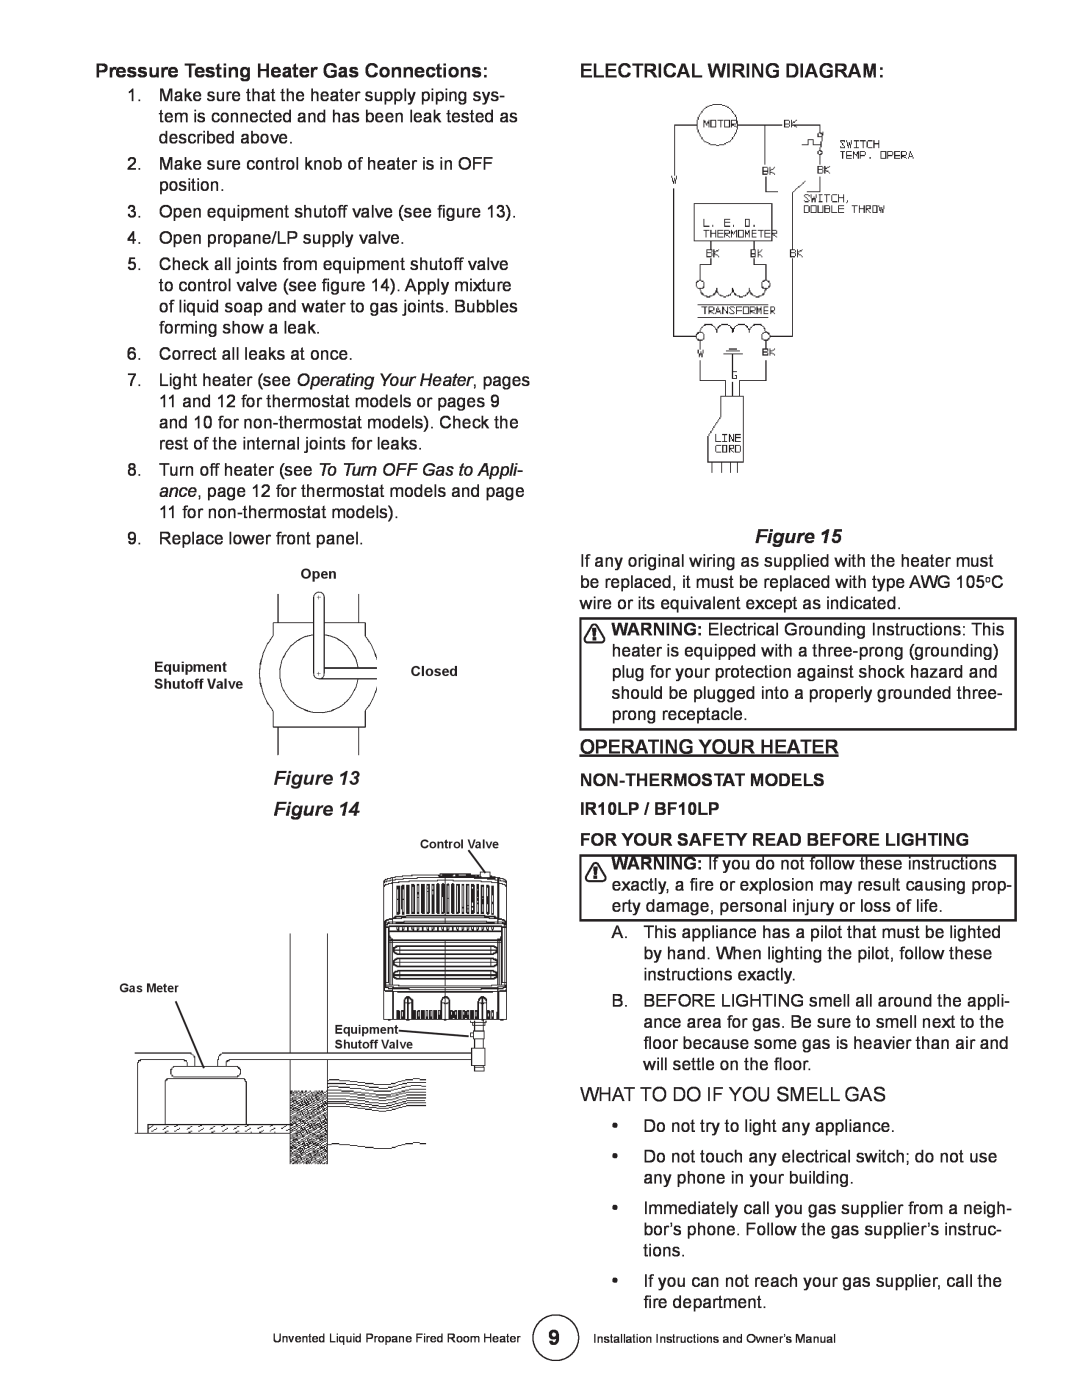 Enerco HSIR30LPT Figure Figure, Pressure Testing Heater Gas Connections, Electrical Wiring Diagram, Operating Your Heater 